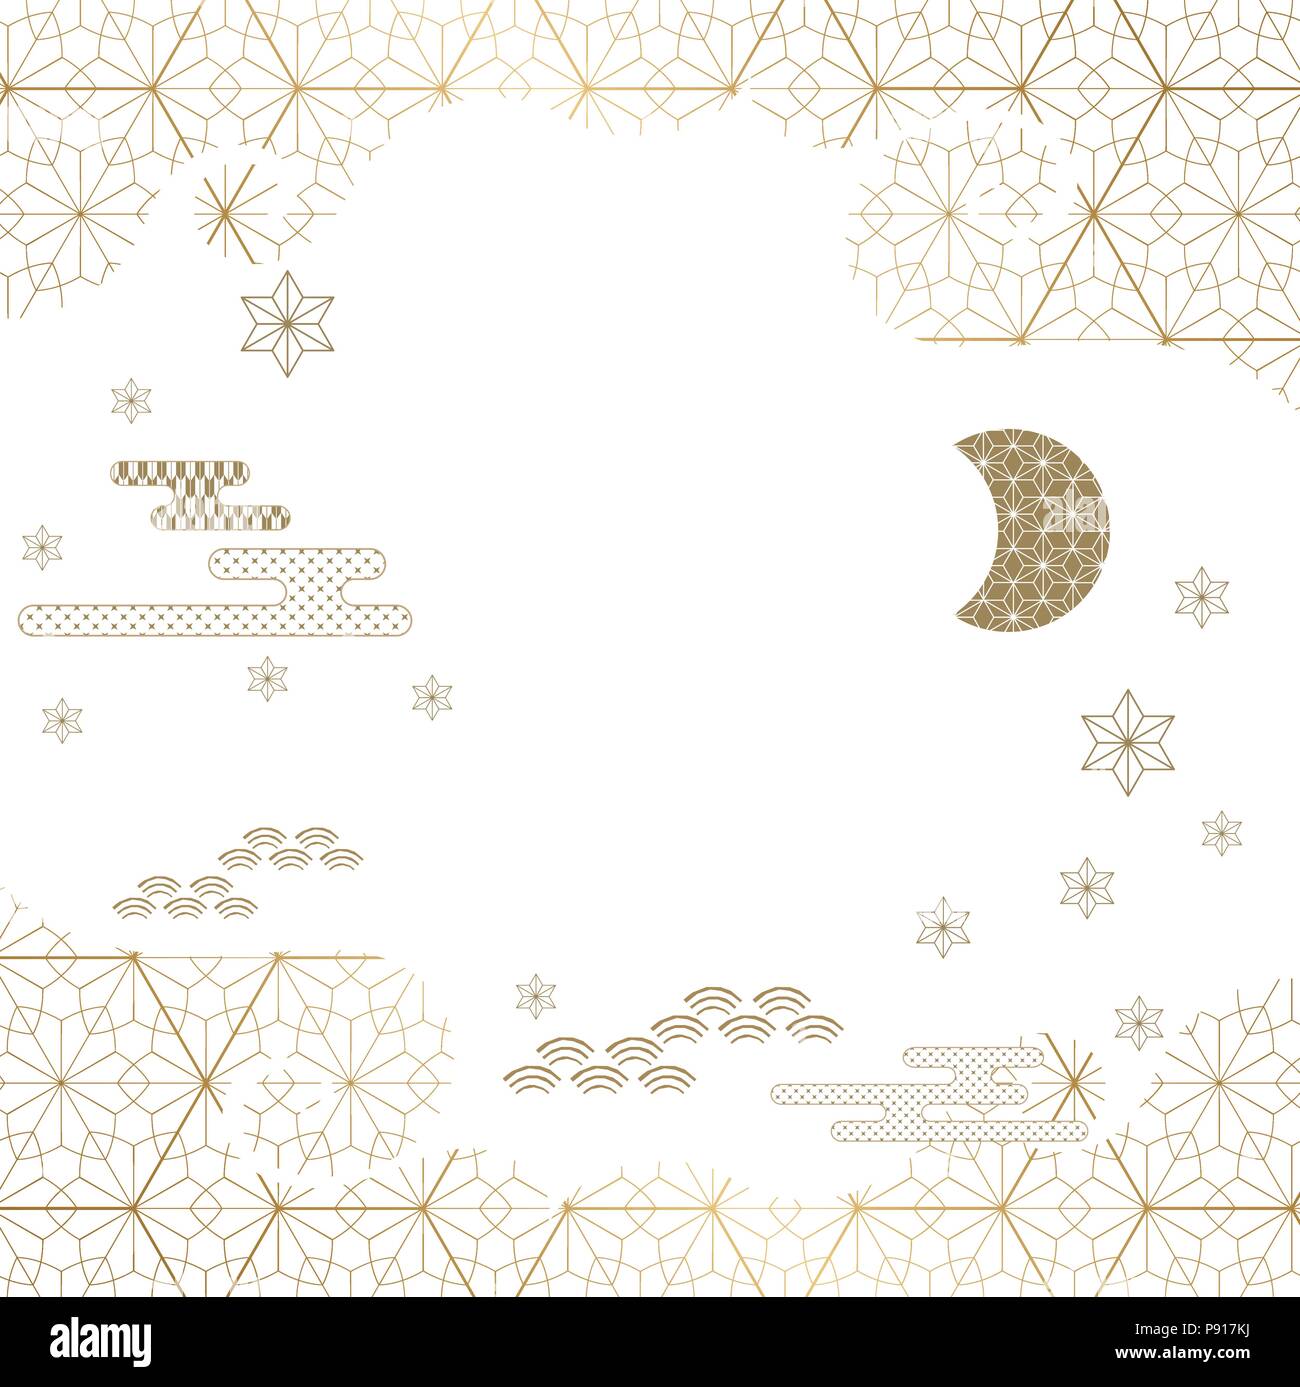 Japanese template vector. Gold geometric background. Stock Vector